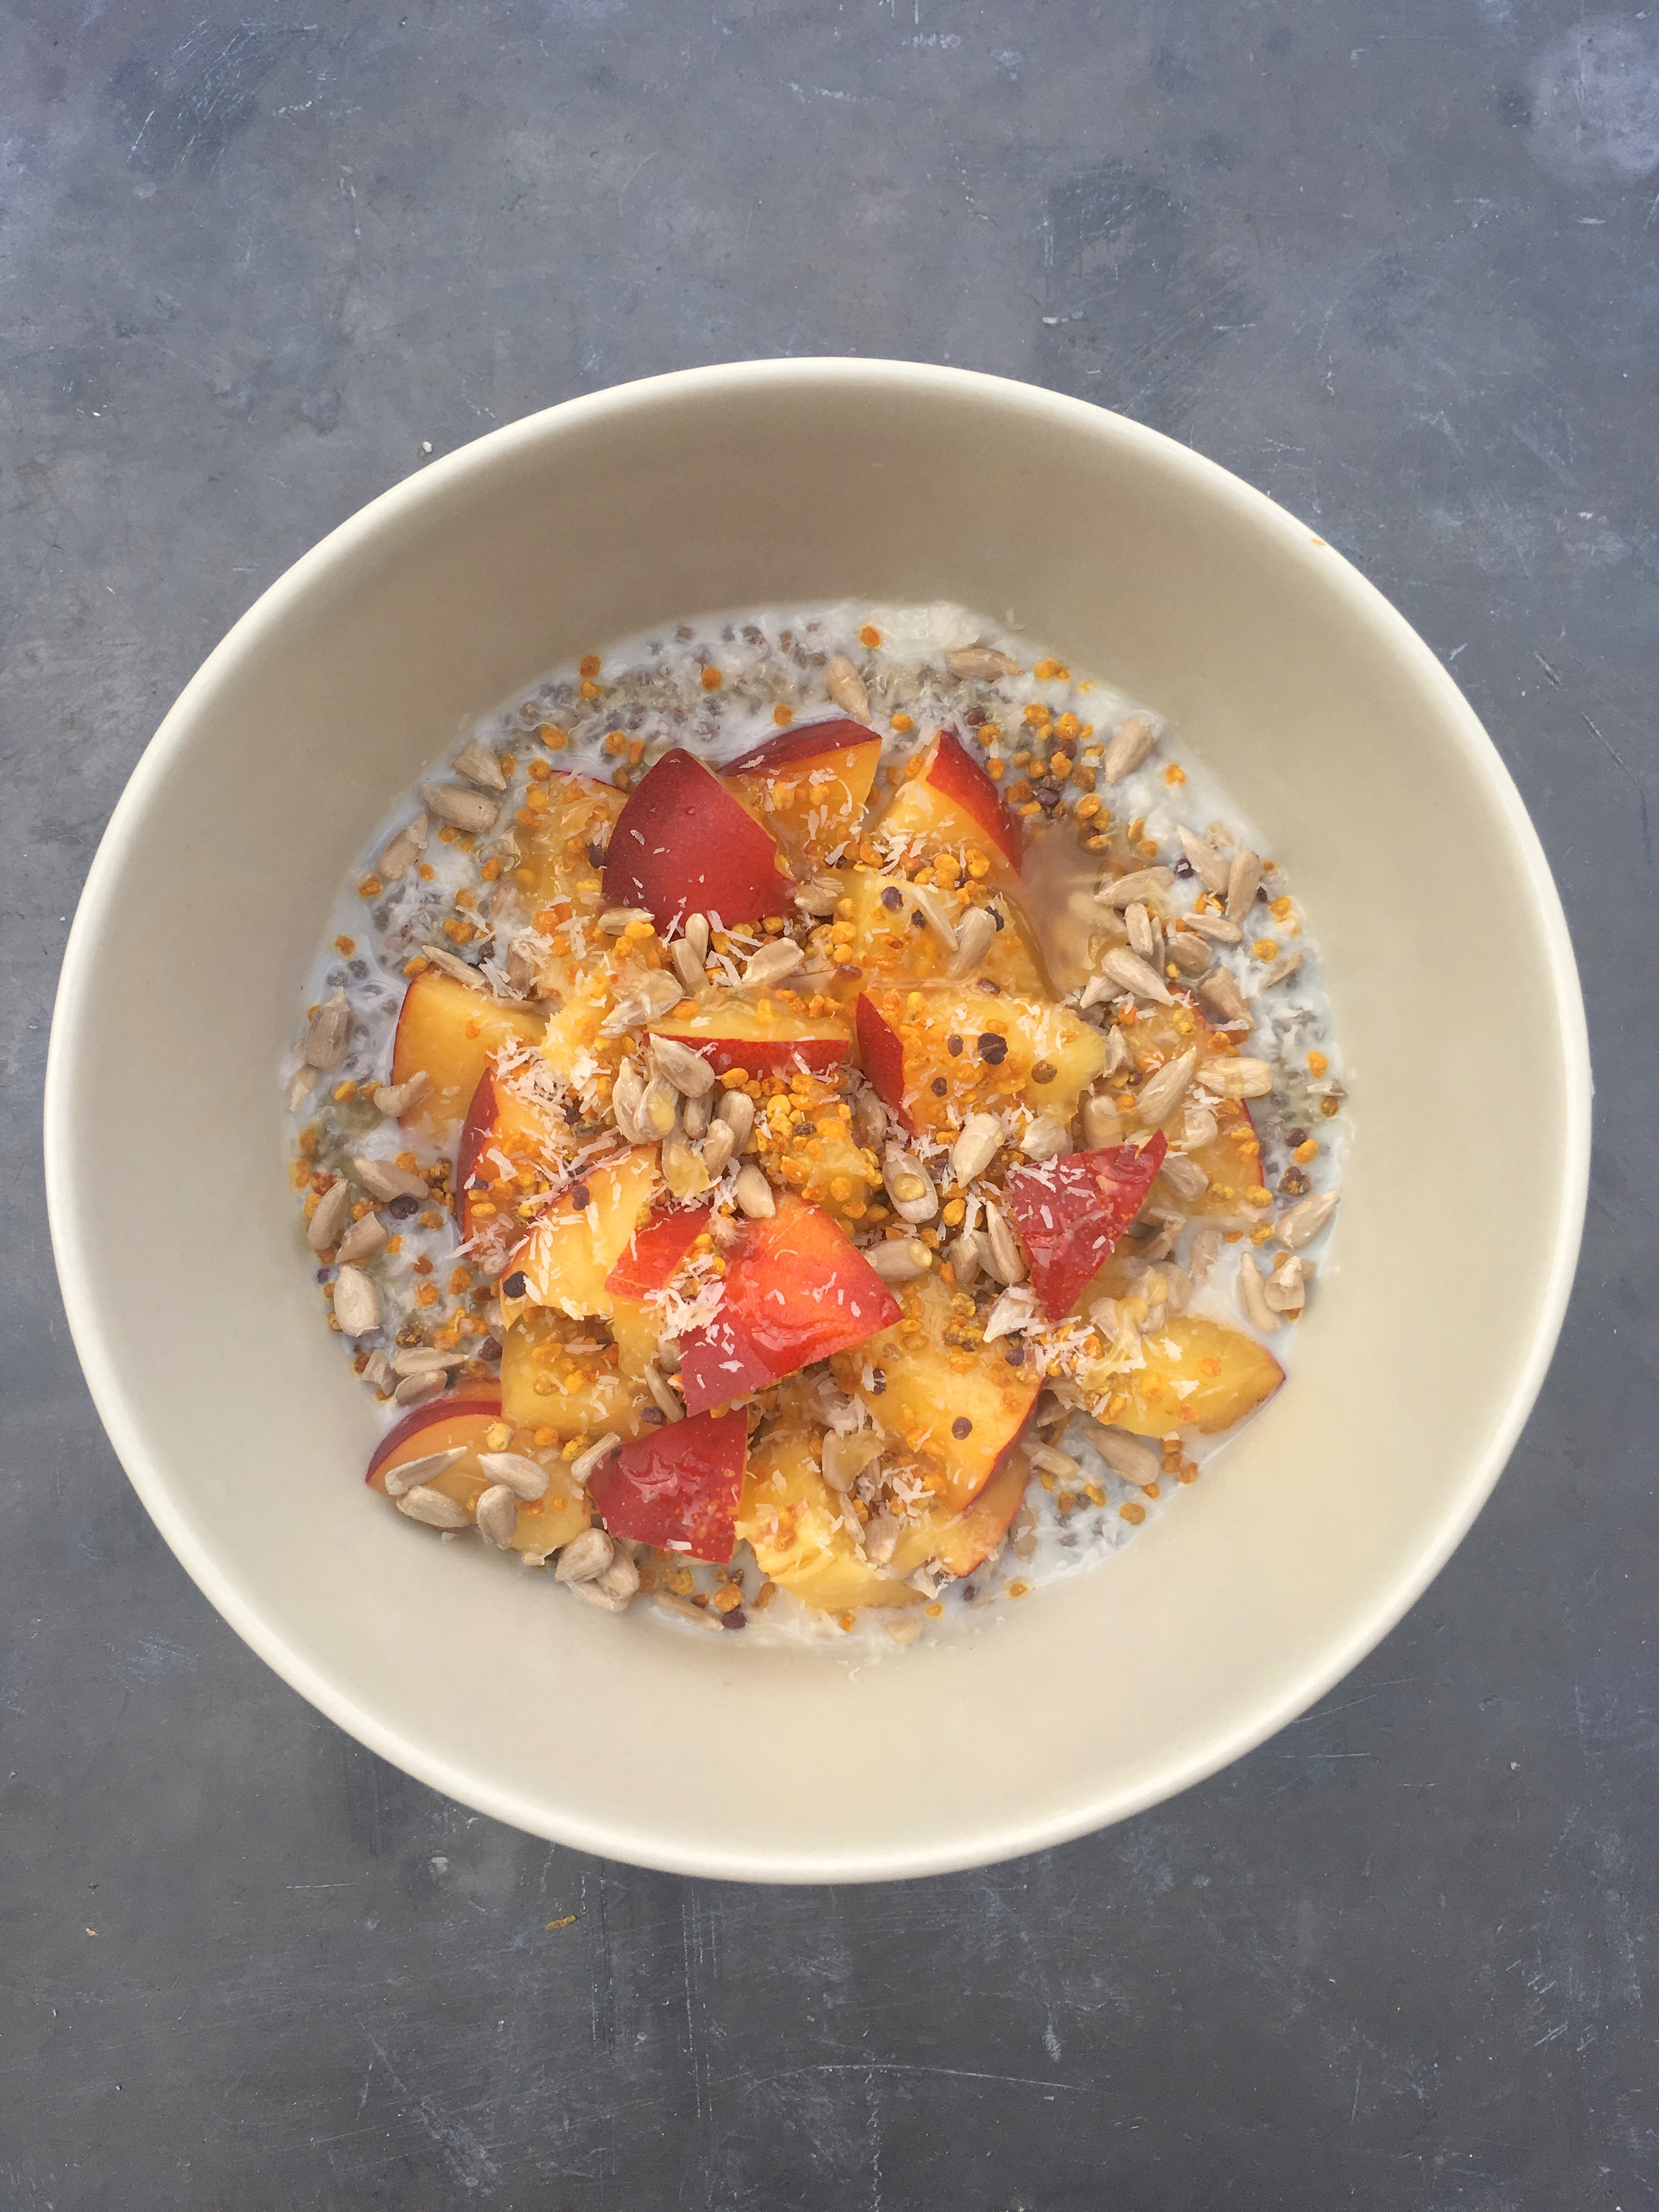 chia pudding with peaches and pollen